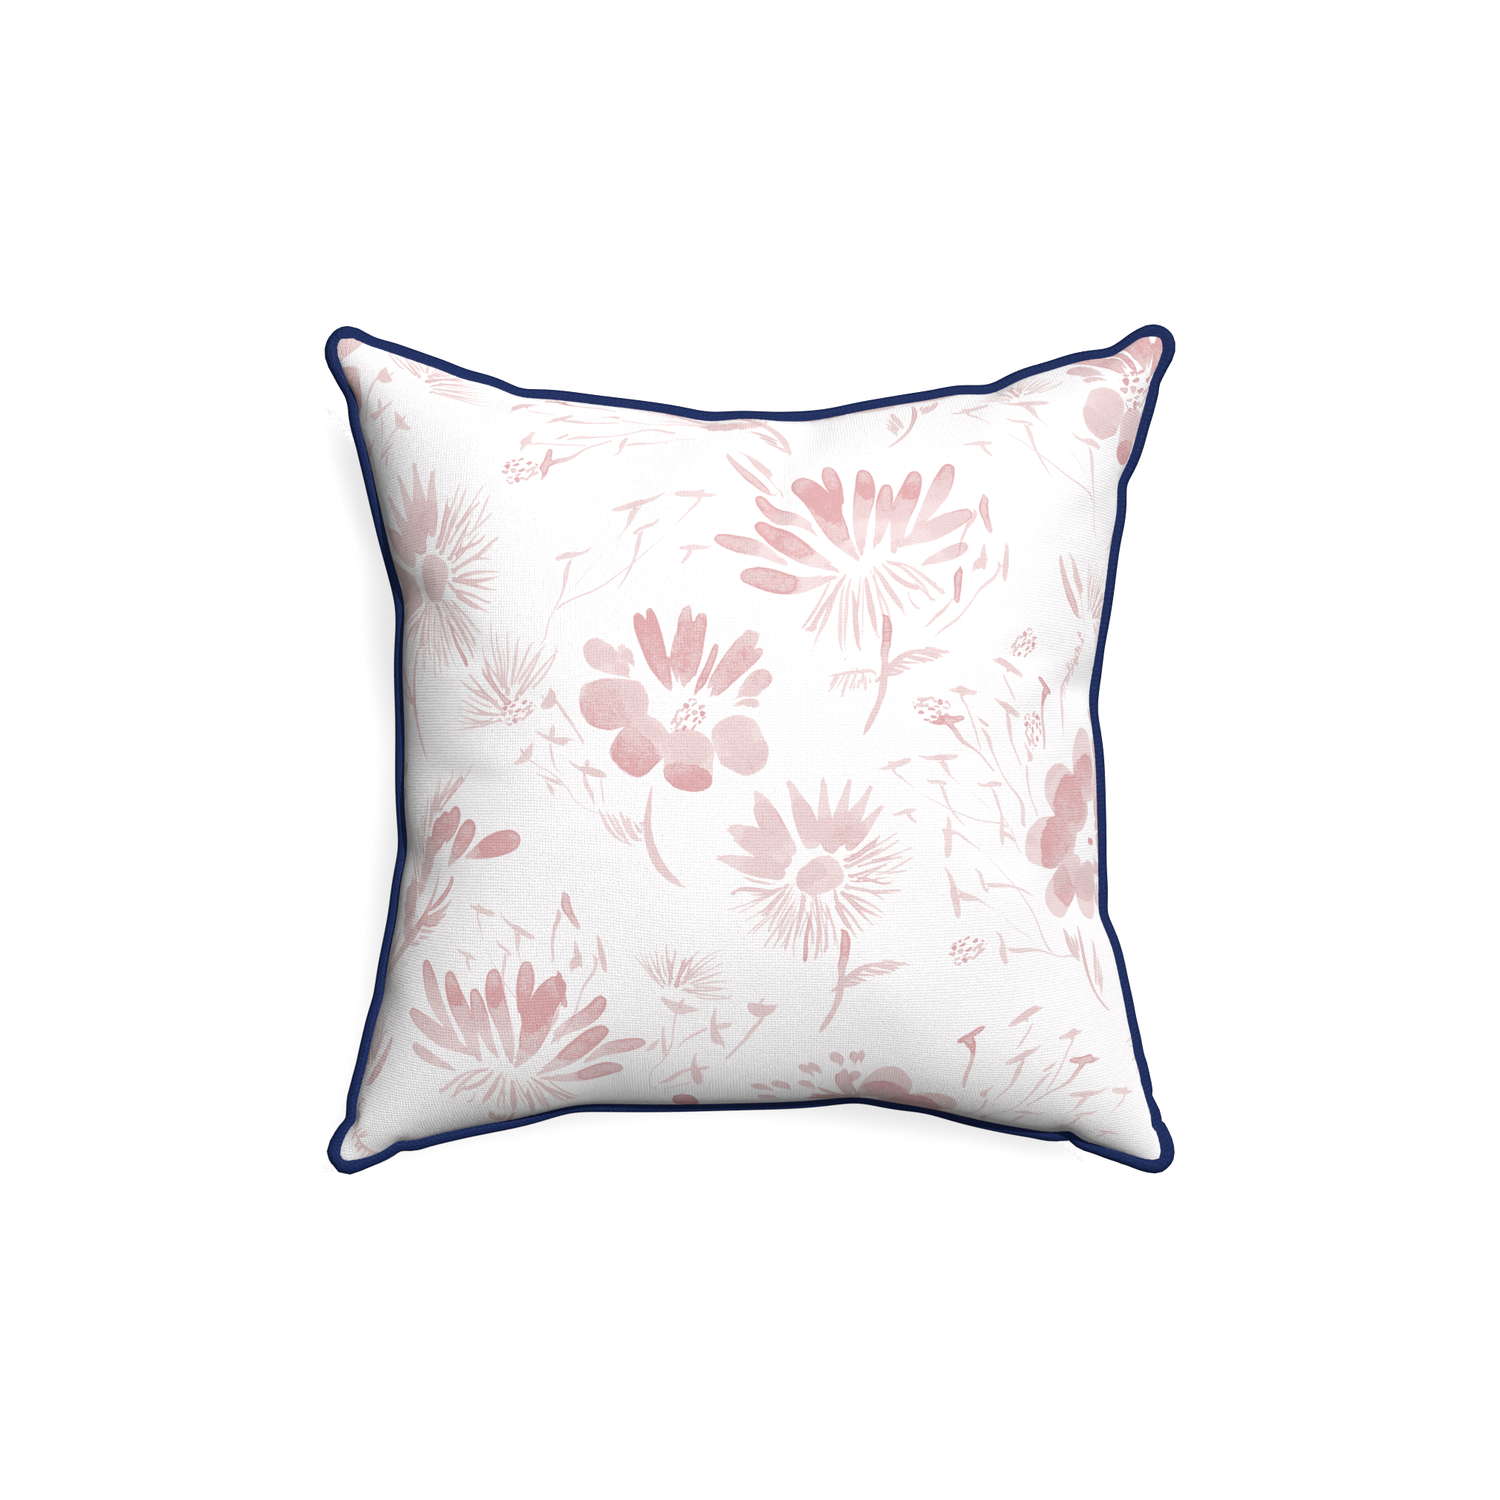 18-square blake custom pink floralpillow with midnight piping on white background